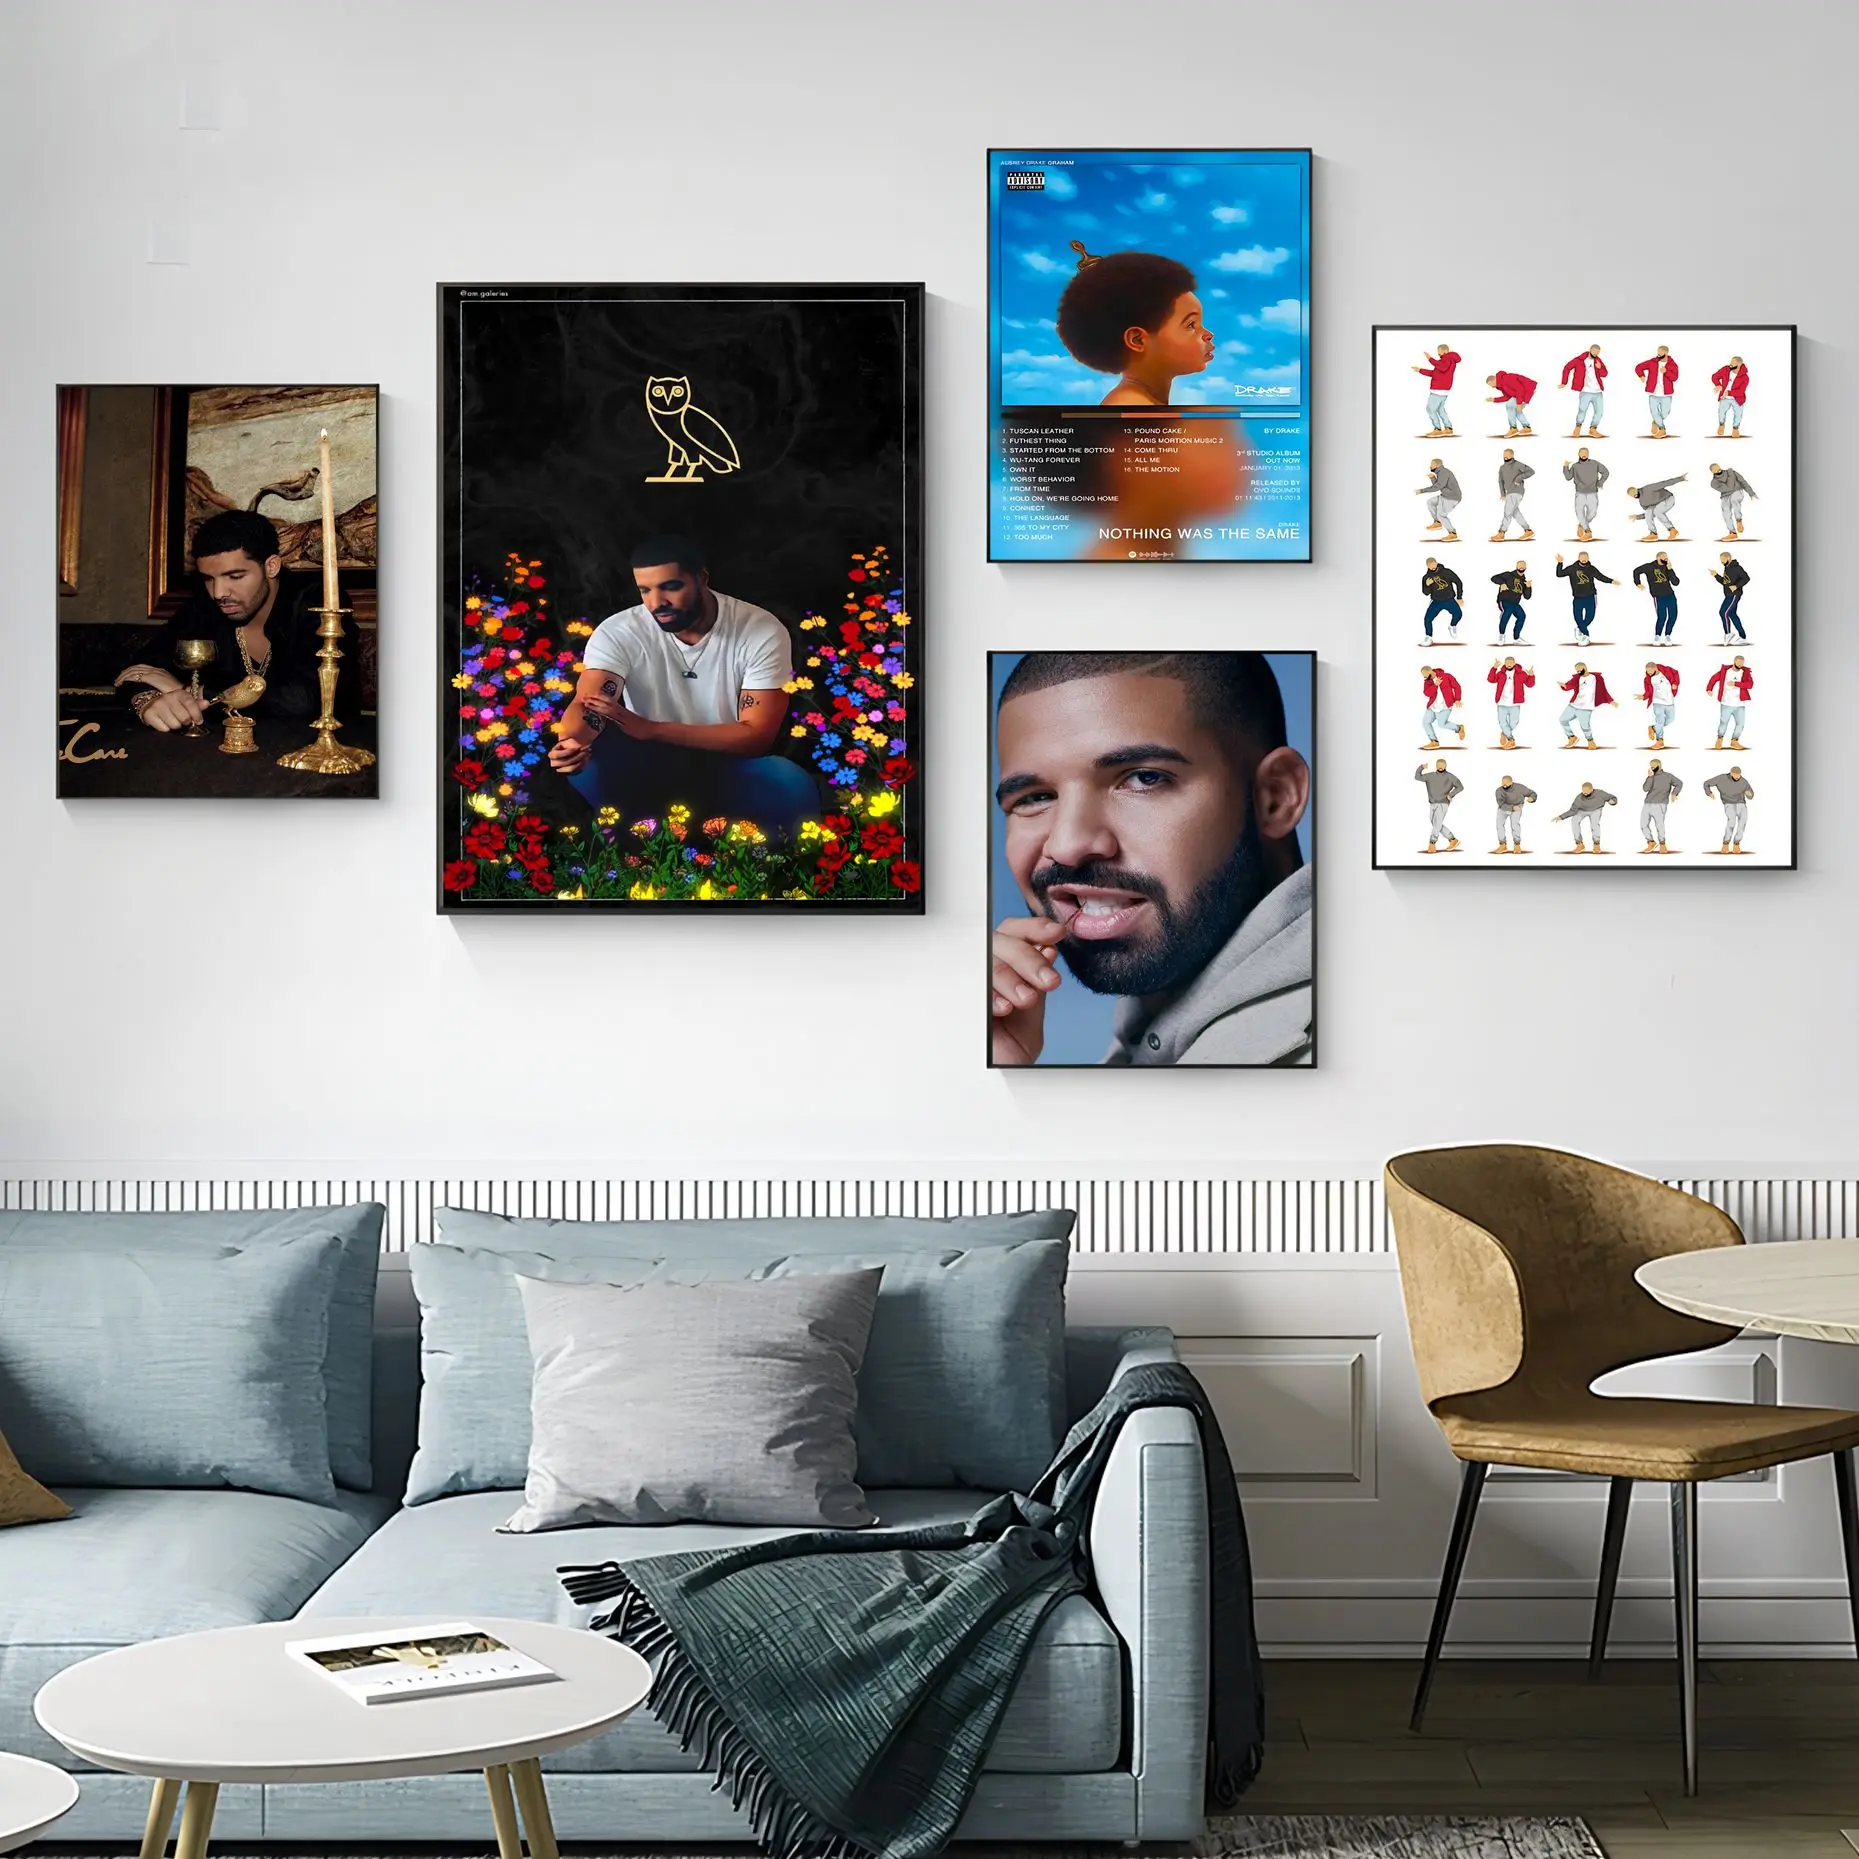 

Drake Hip Hop Rap Music Album Rapper Star Movie Sticky Posters Waterproof Paper Sticker Coffee House Bar Posters Wall Stickers